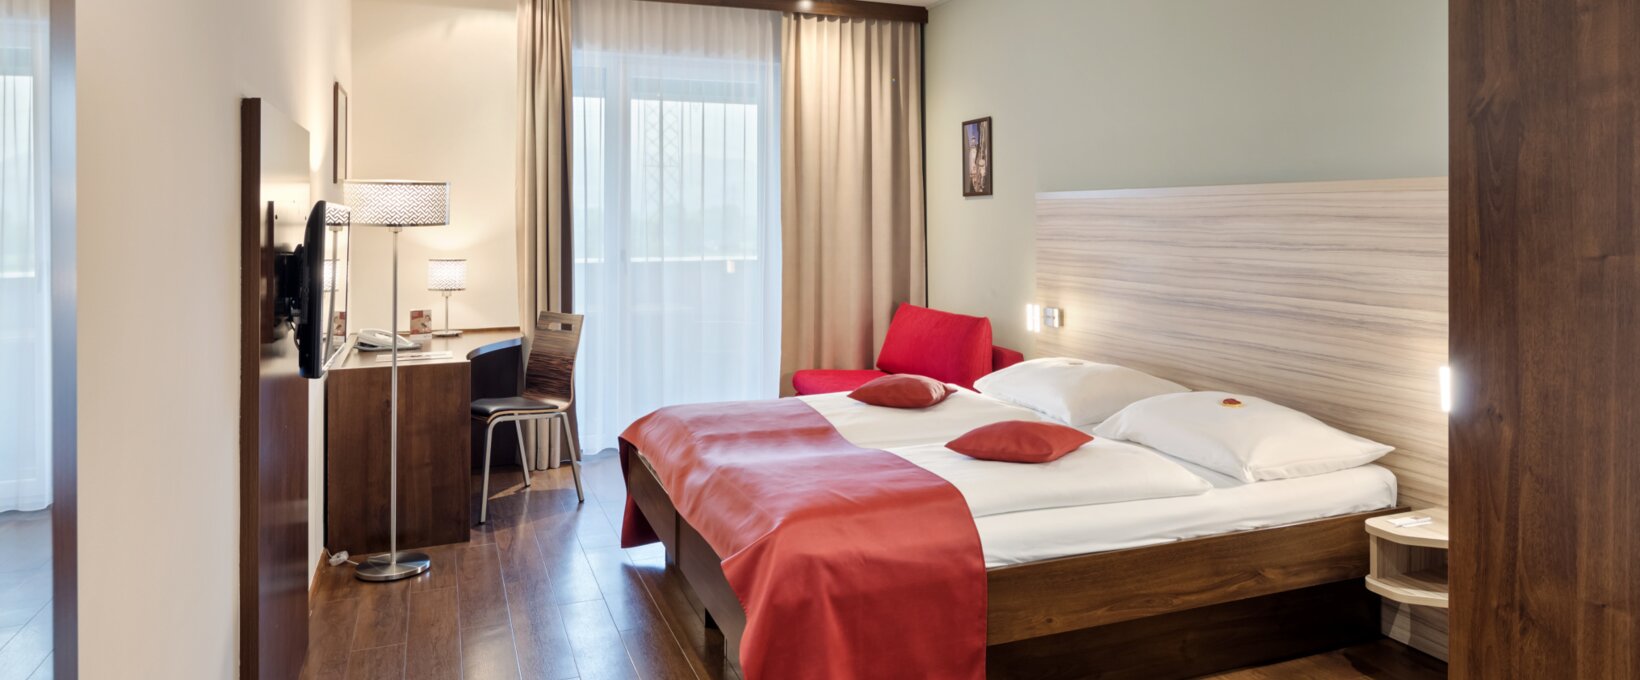 Superior Room with double bed and TV | Hotel Salzburg Messe